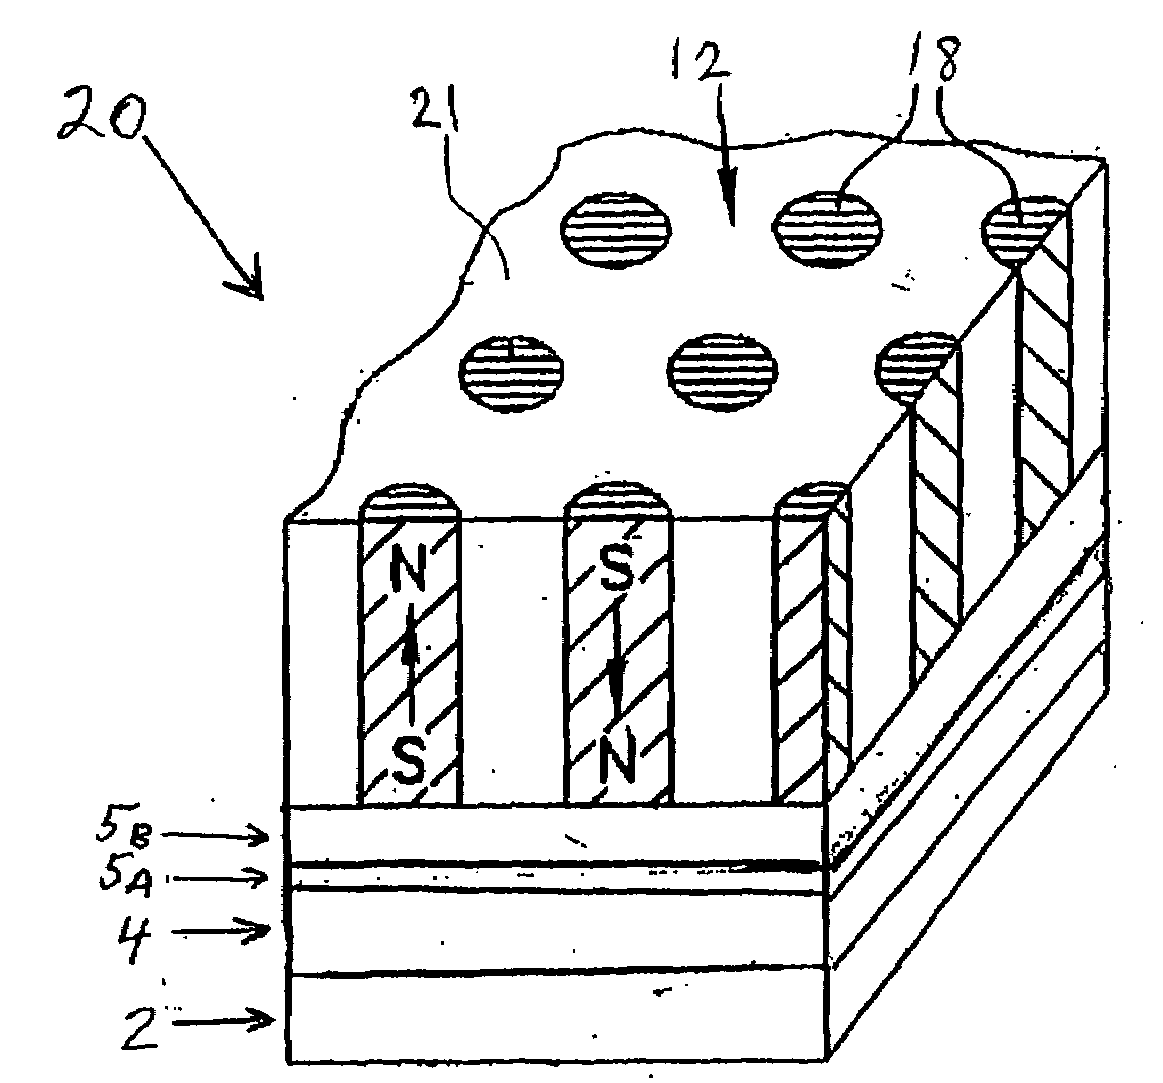 Process for fabricating patterned magnetic recording media